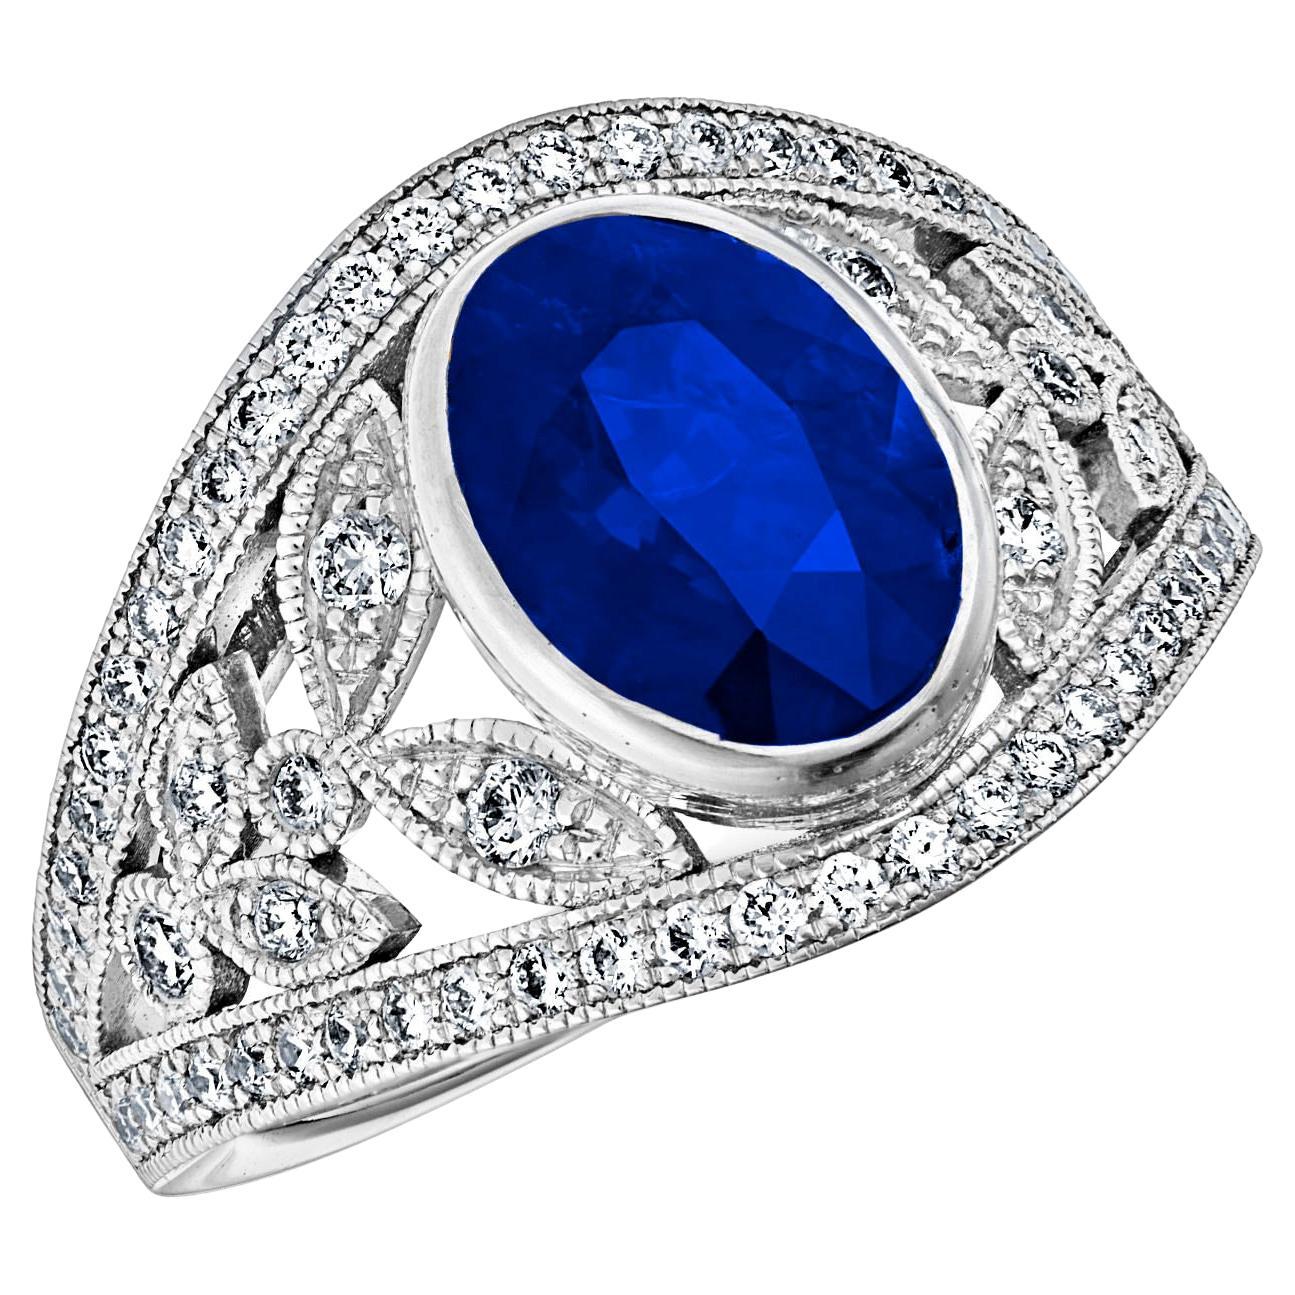 18k White Gold Band Ring 3 Ct Royal Blue Oval Sapphire and 0.60 Cts of Diamonds